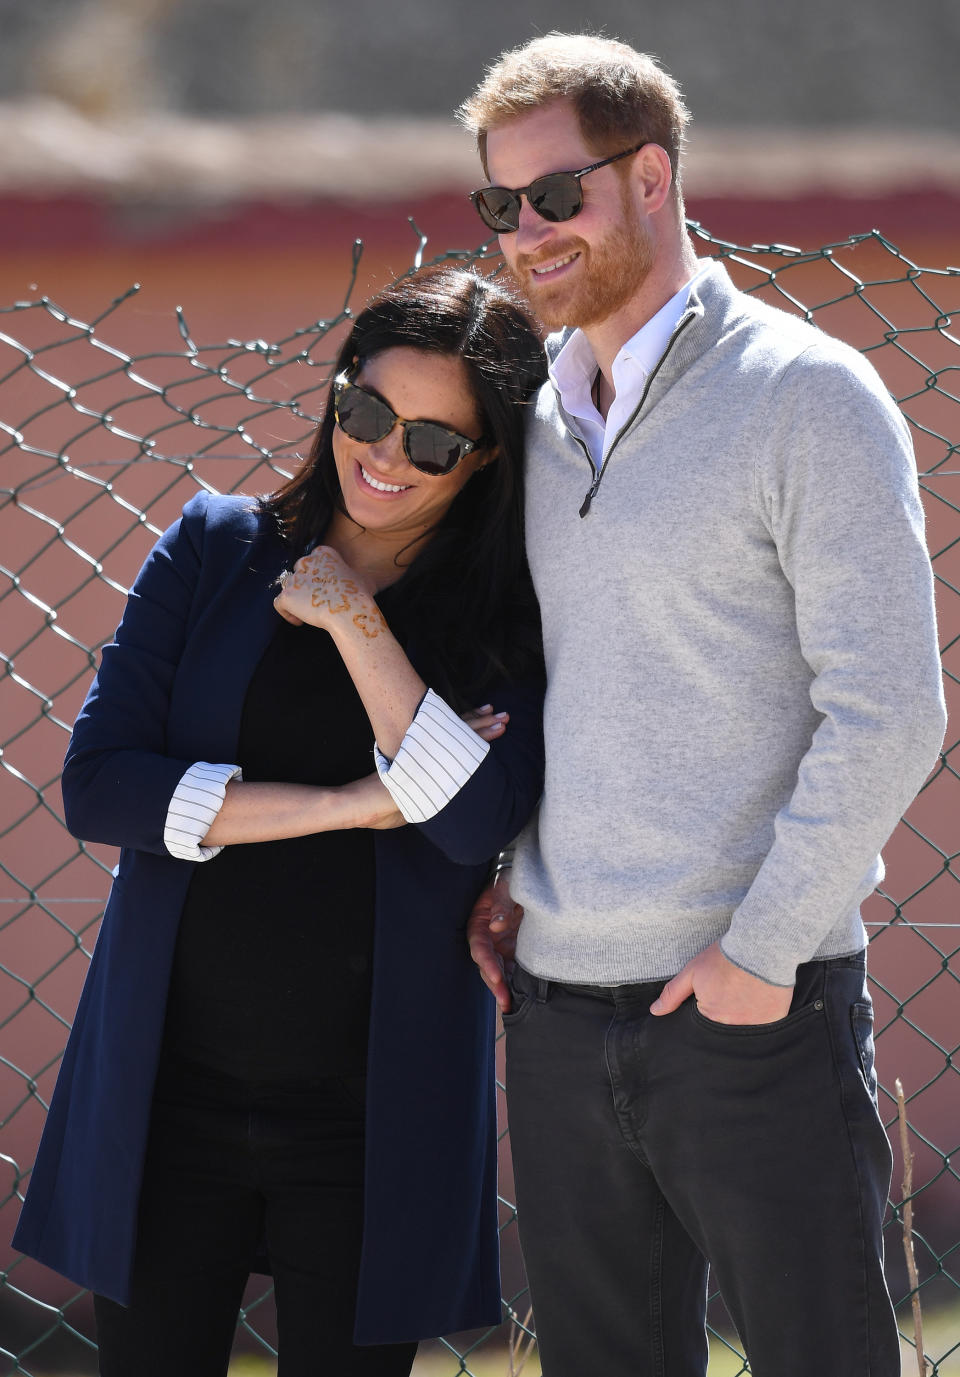 ASNI, MOROCCO - FEBRUARY 24: (UK OUT FOR 28 DAYS) Prince Harry, Duke of Sussex and Meghan, Duchess of Sussex visit a local secondary school meeting students and teachers on February 24, 2019 in Asni, Morocco.  (Photo by Pool/Samir Hussein/WireImage)